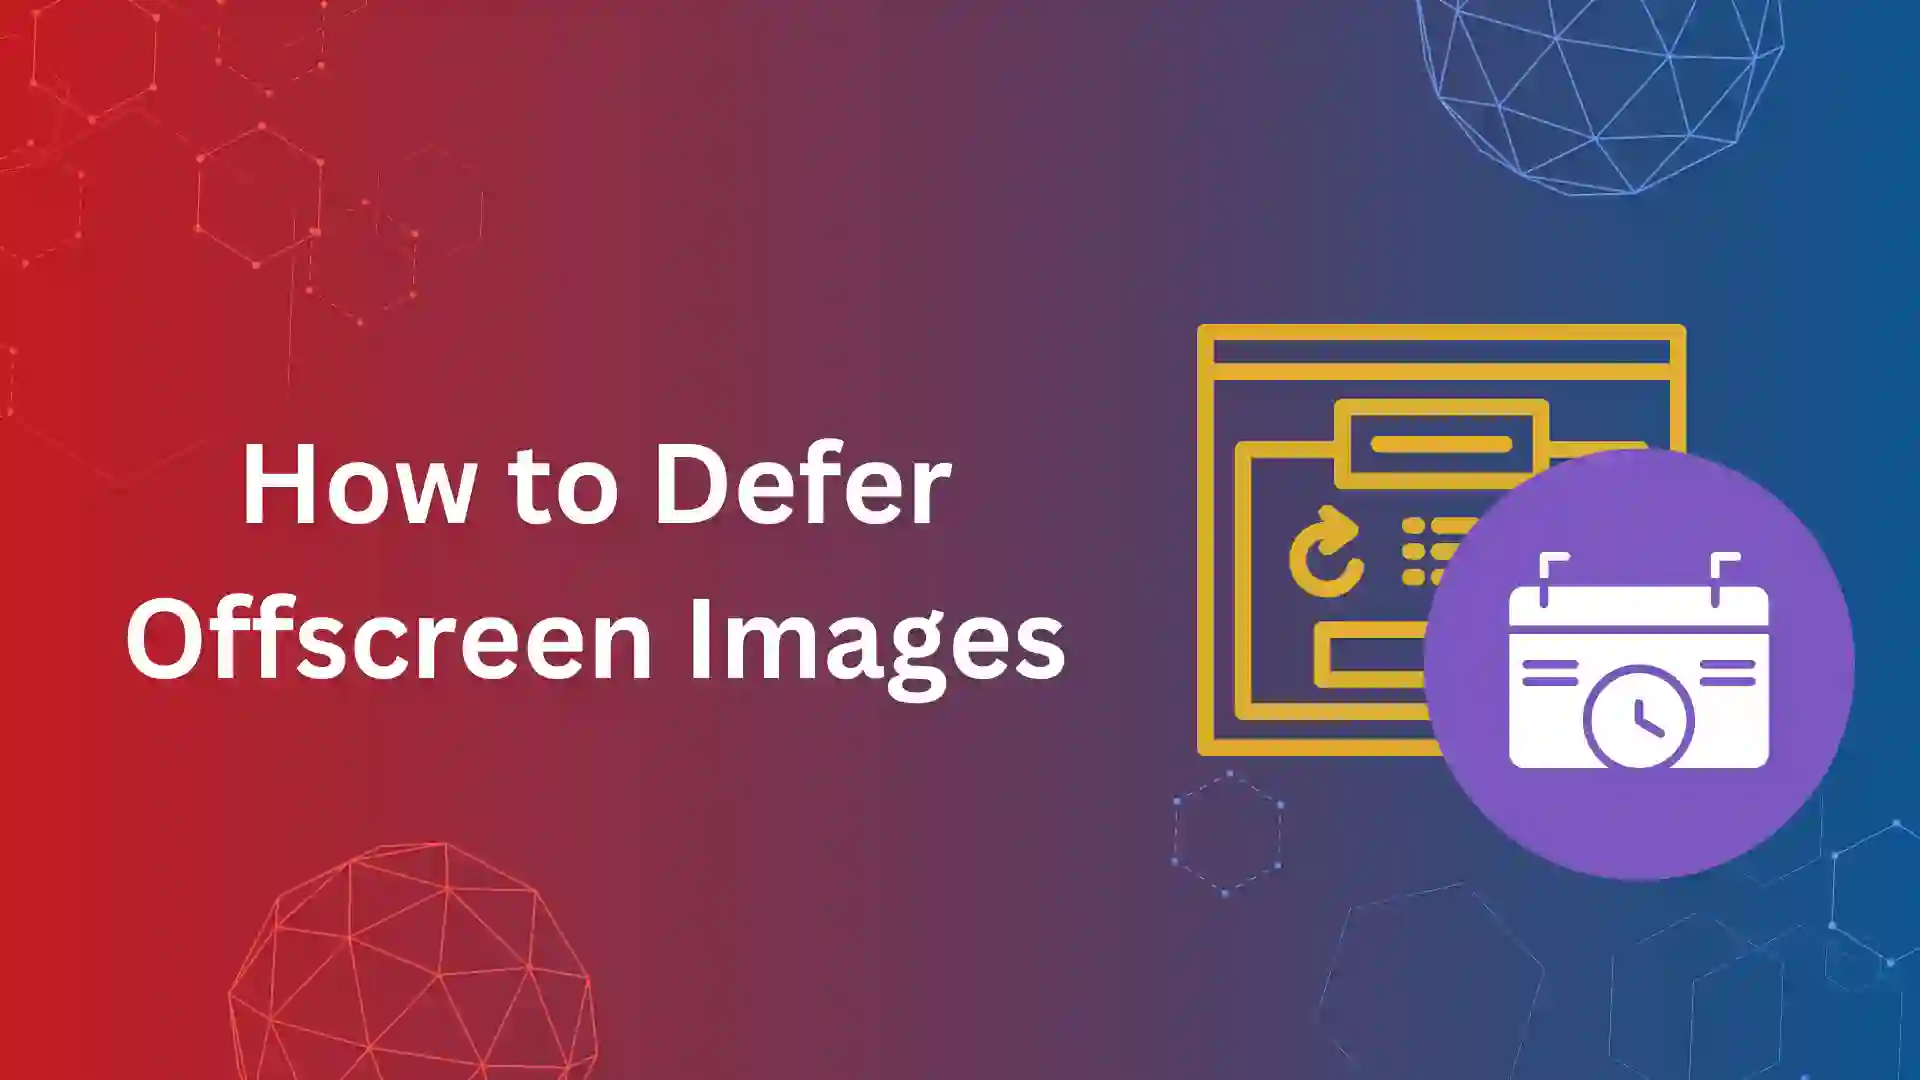 How to Defer Offscreen Images